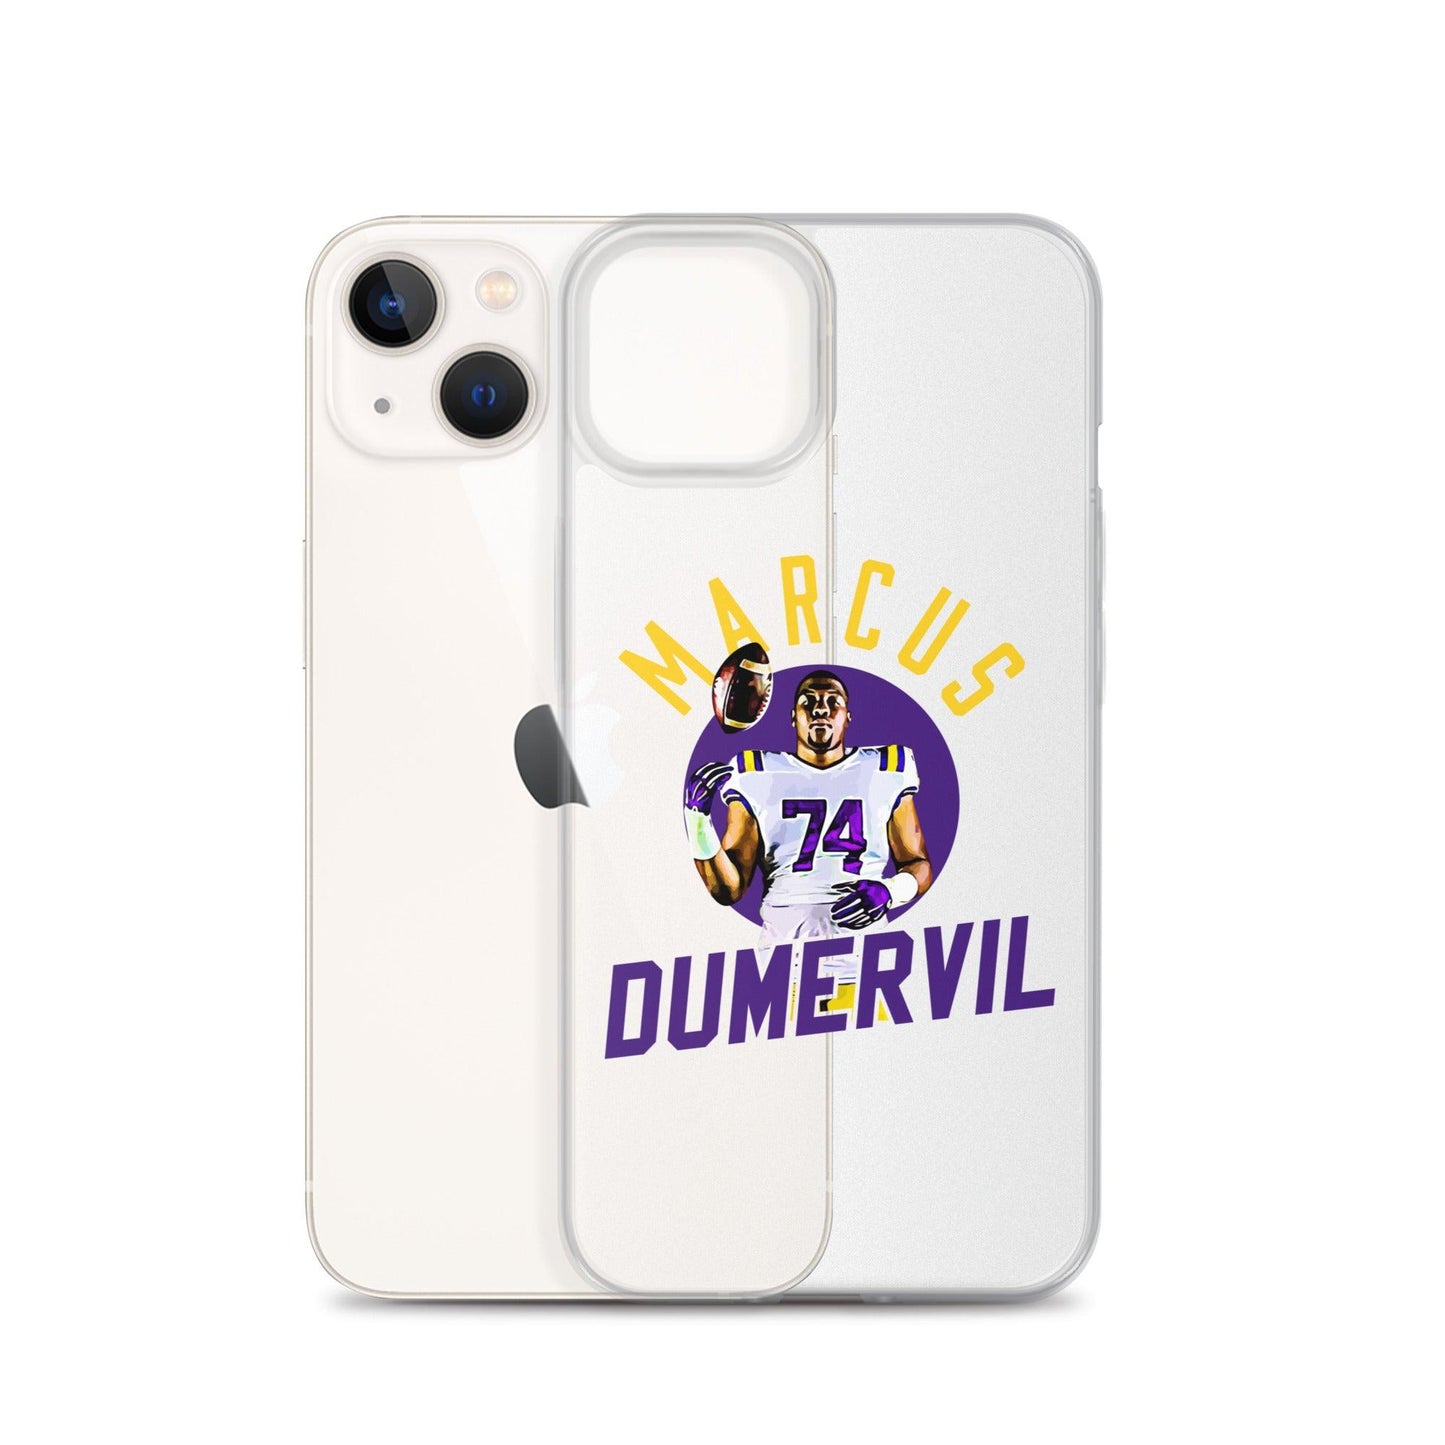 Marcus Dumervil "Game Ready" iPhone Case - Fan Arch